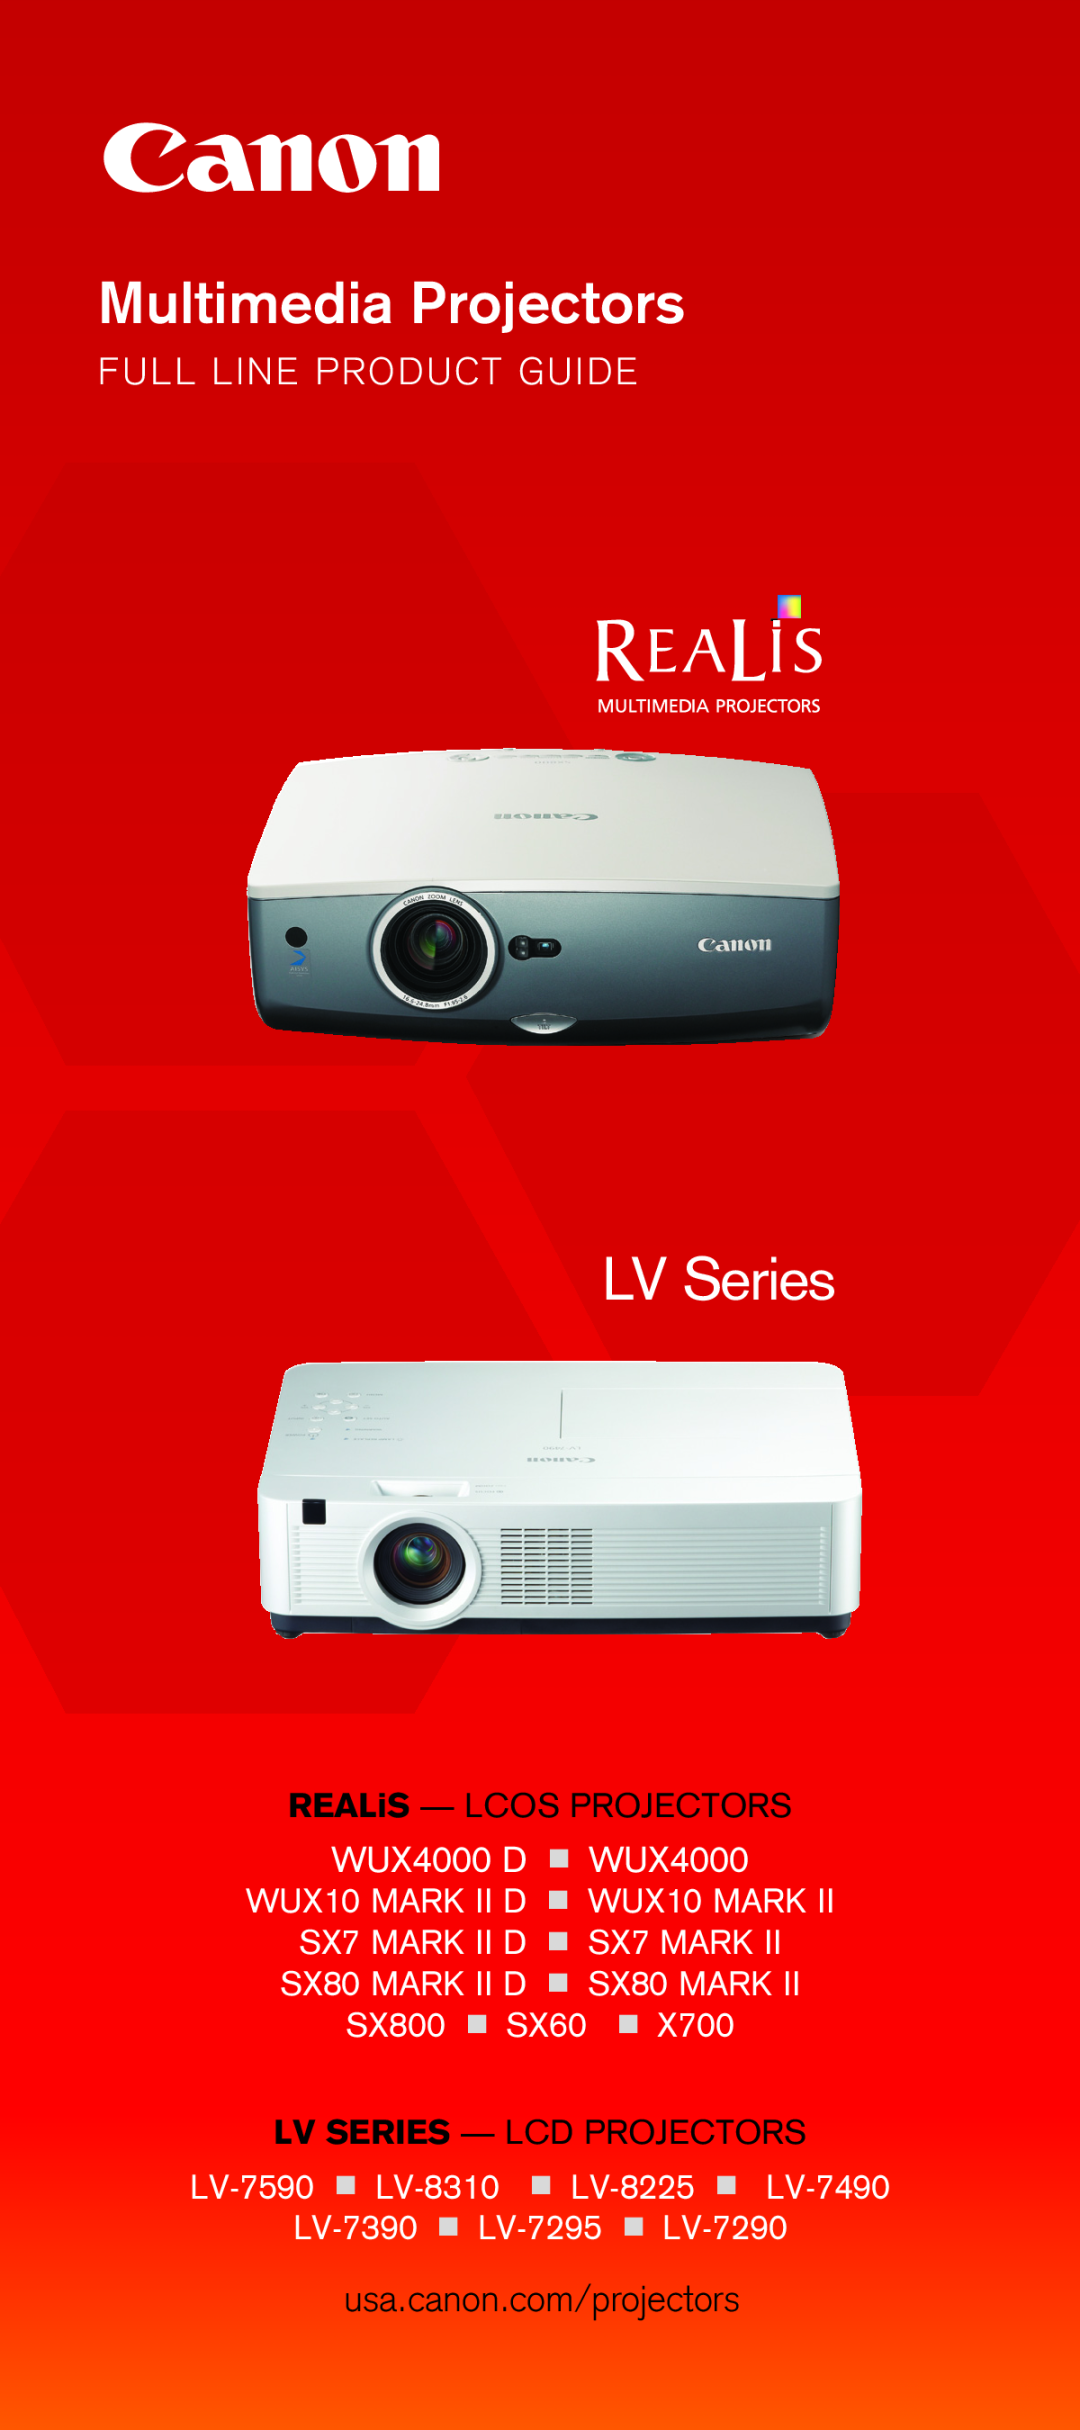 Canon 7590 manual Multimedia Projectors, LV Series, Full Line Product Guide, WUX4000 D n WUX4000, usa.canon.com/projectors 